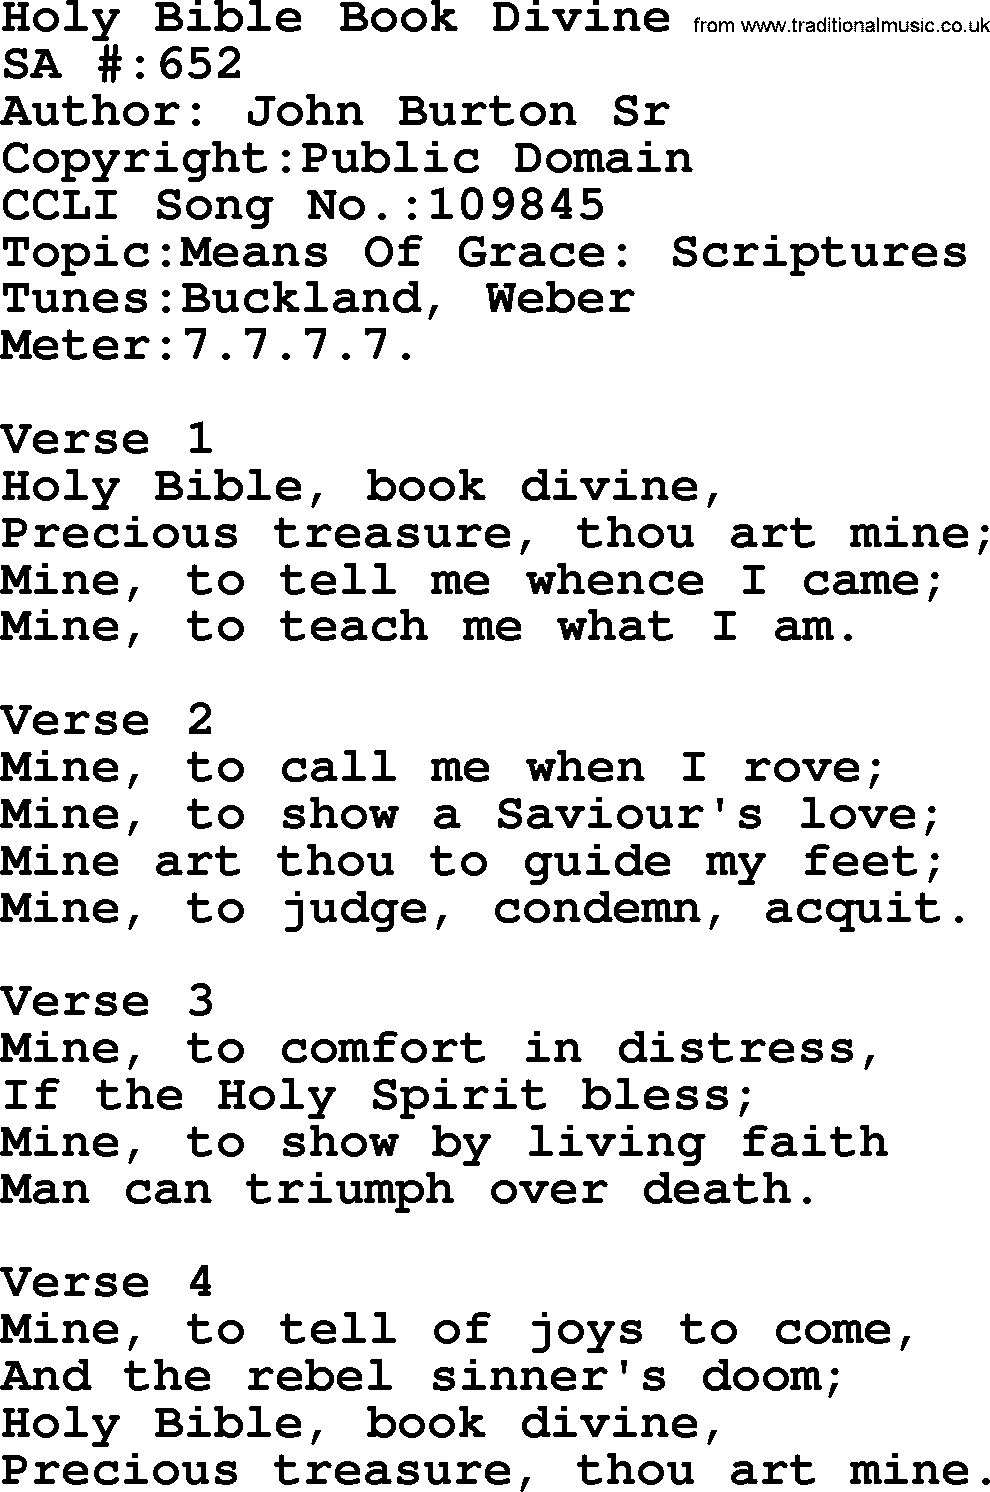 Salvation Army Hymnal, title: Holy Bible Book Divine, with lyrics and PDF,